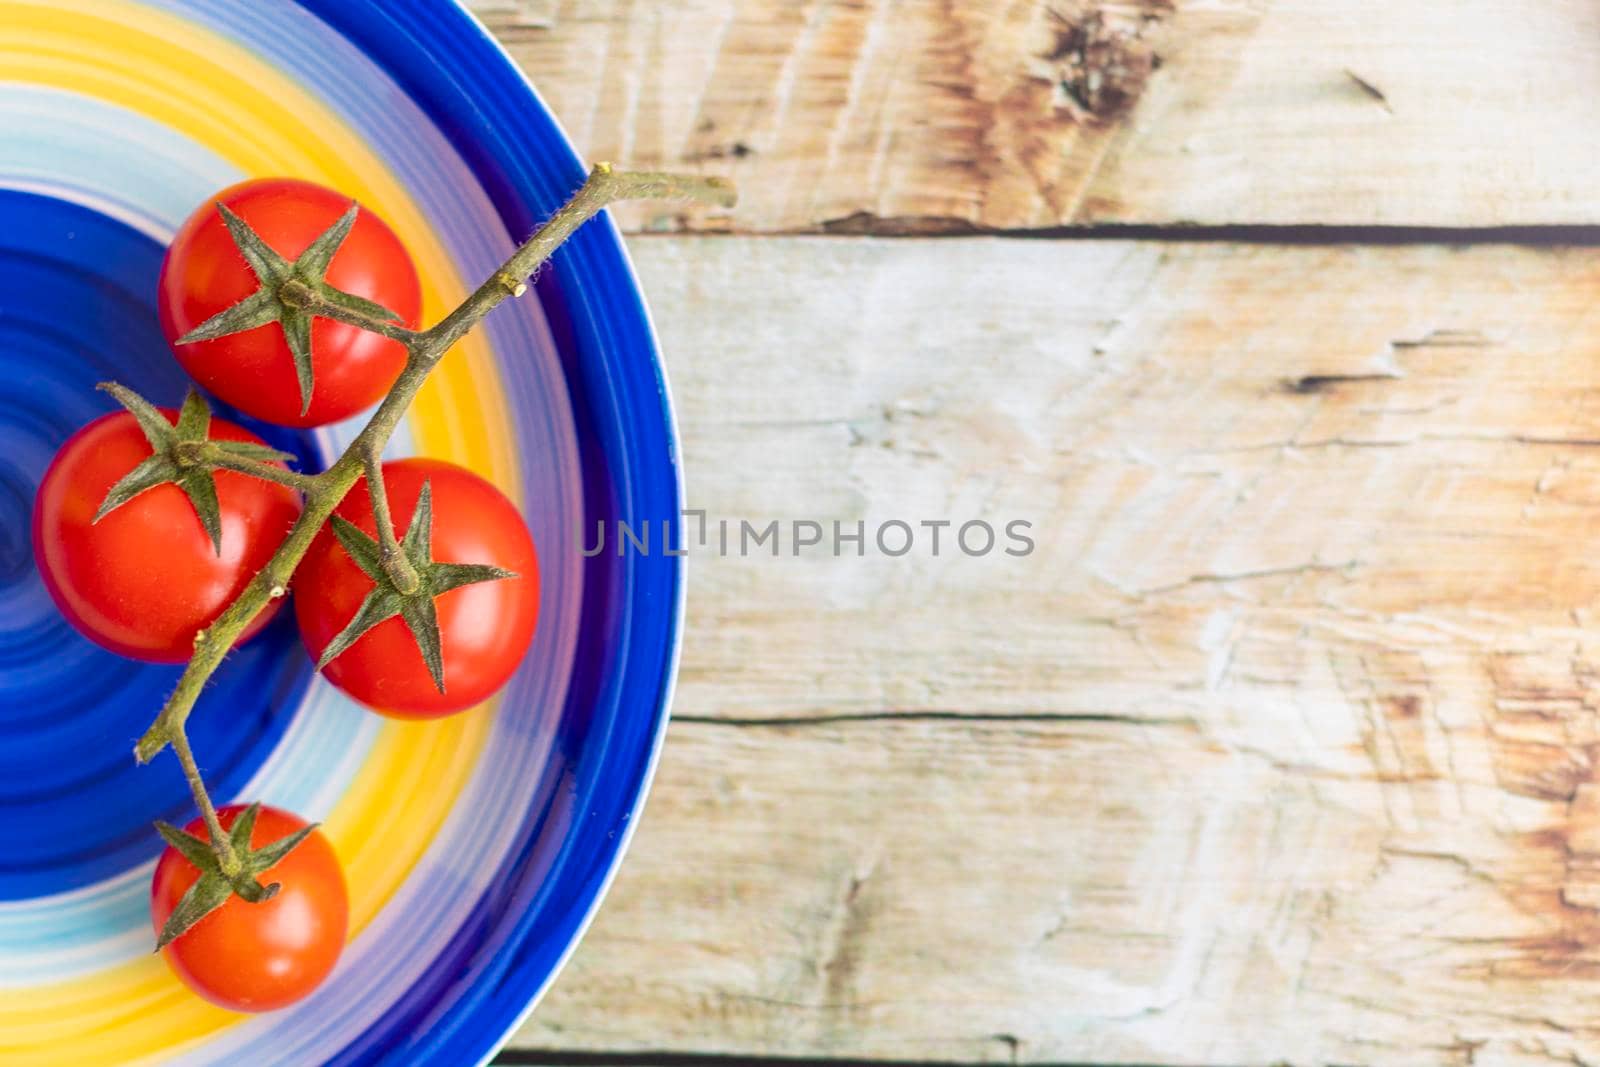 Cherry tomatoes on colorful striped plate and brown wooden background by eagg13